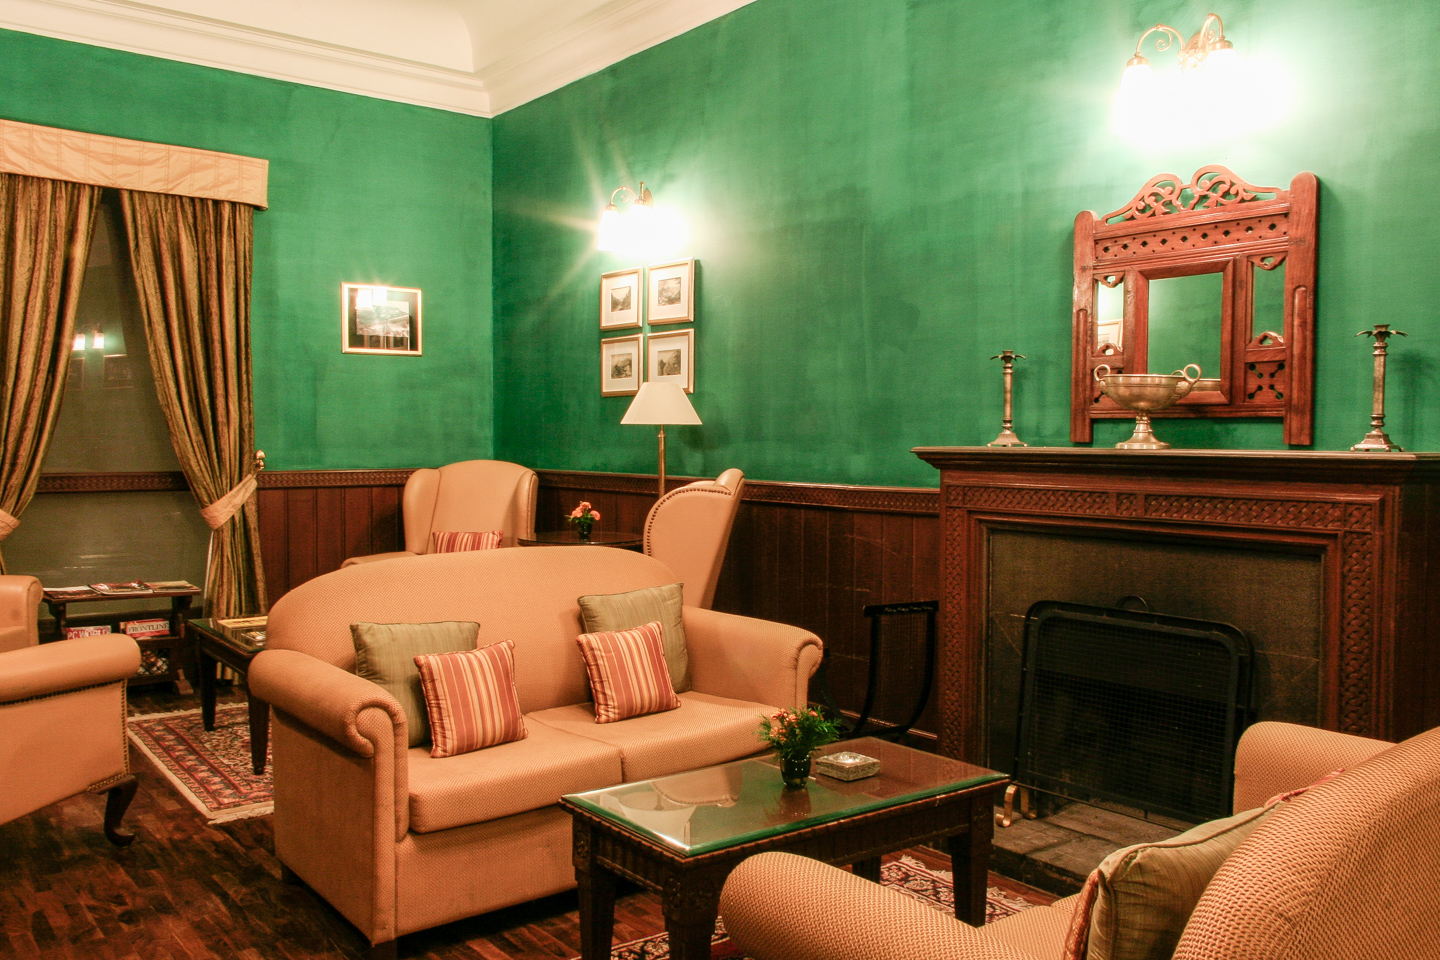 The library has wood panelling and deep green walls. The fireplace is faced in flamed granite and has an intricately carved wooden surround.